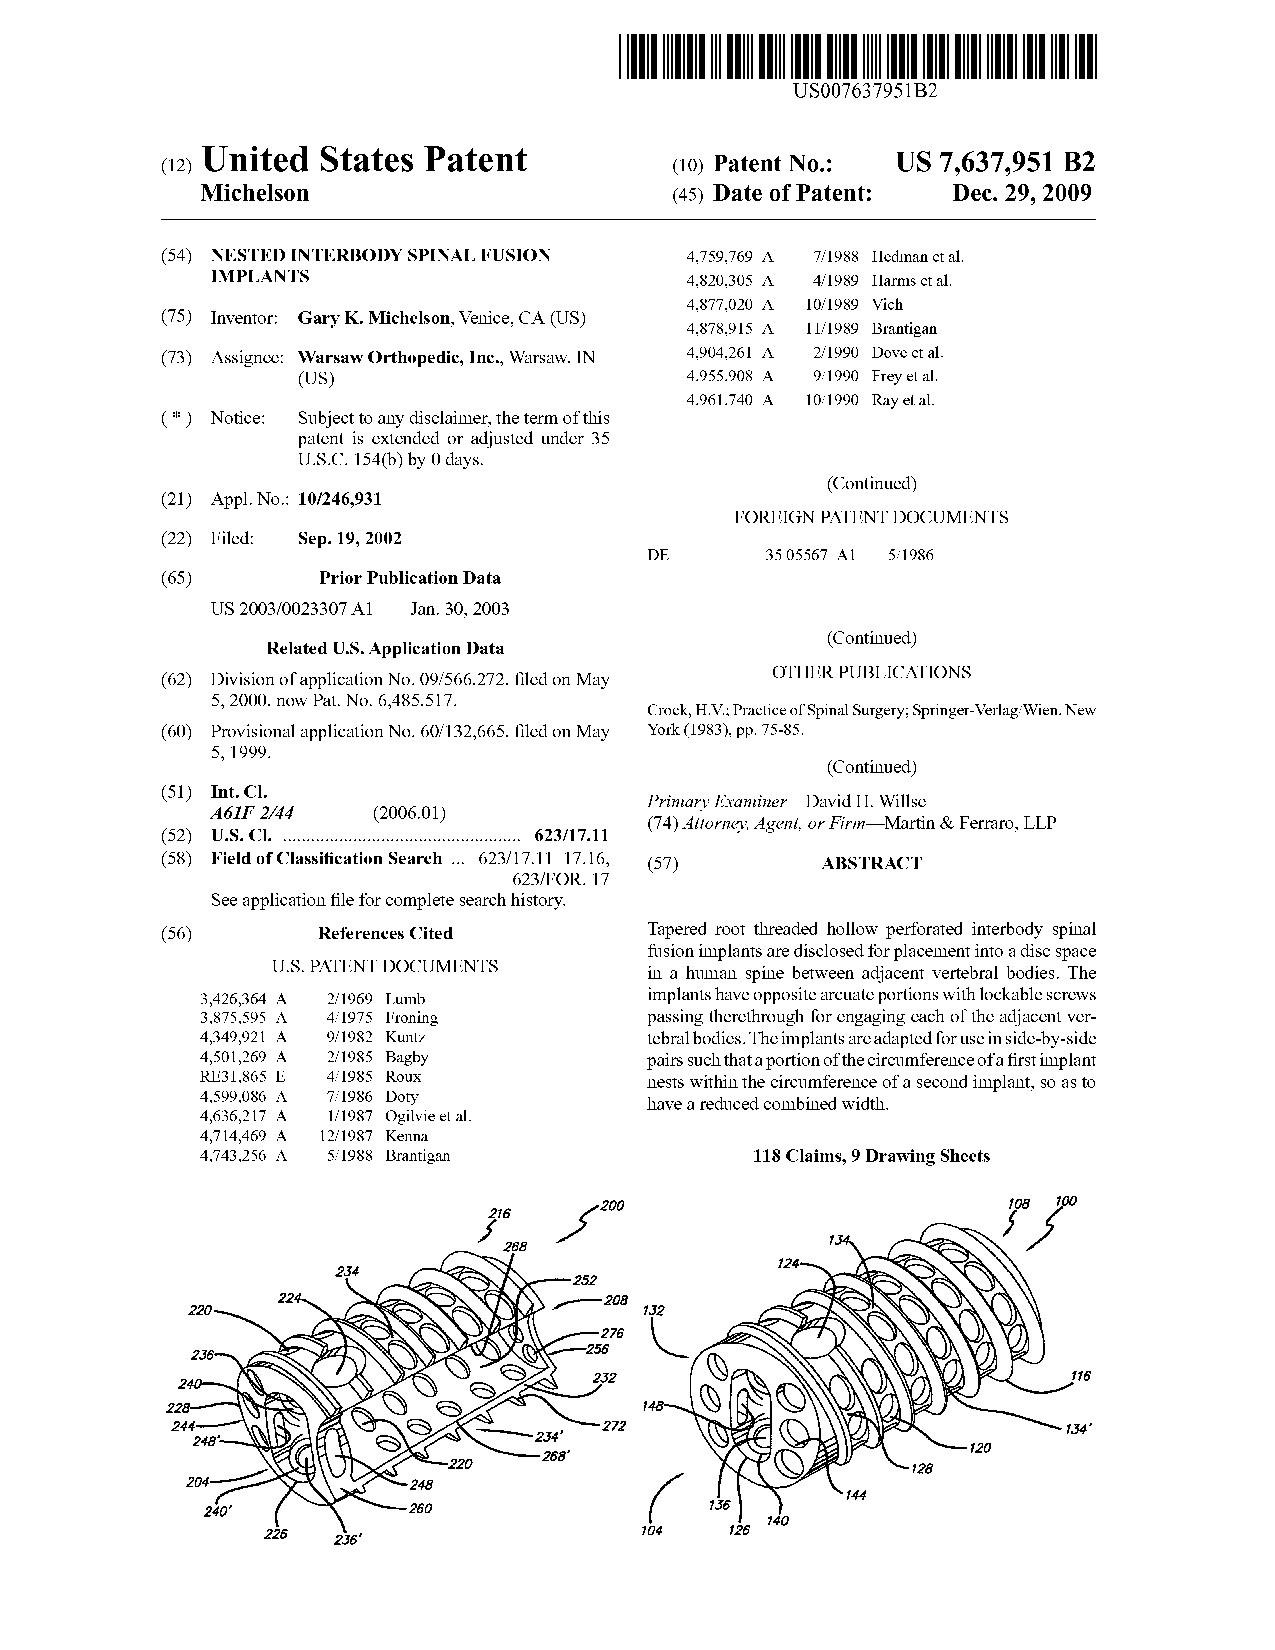 Nested interbody spinal fusion implants - Patent 7,637,951